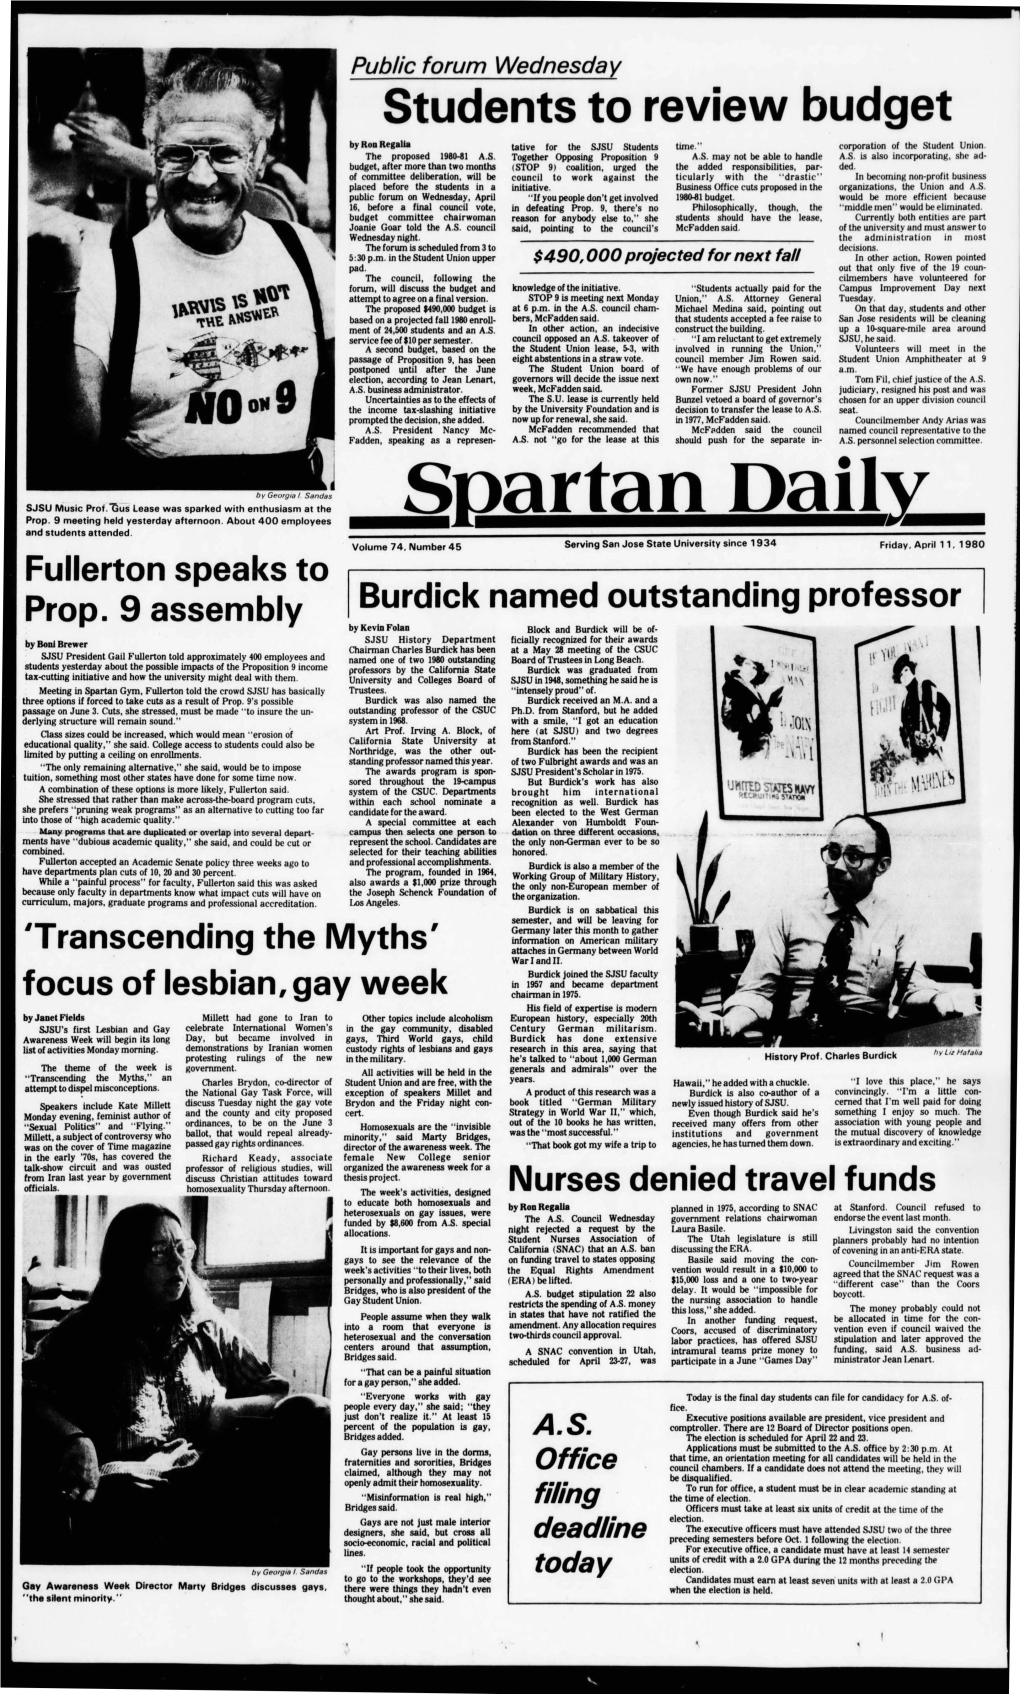 Spartan Daily and Students Attended